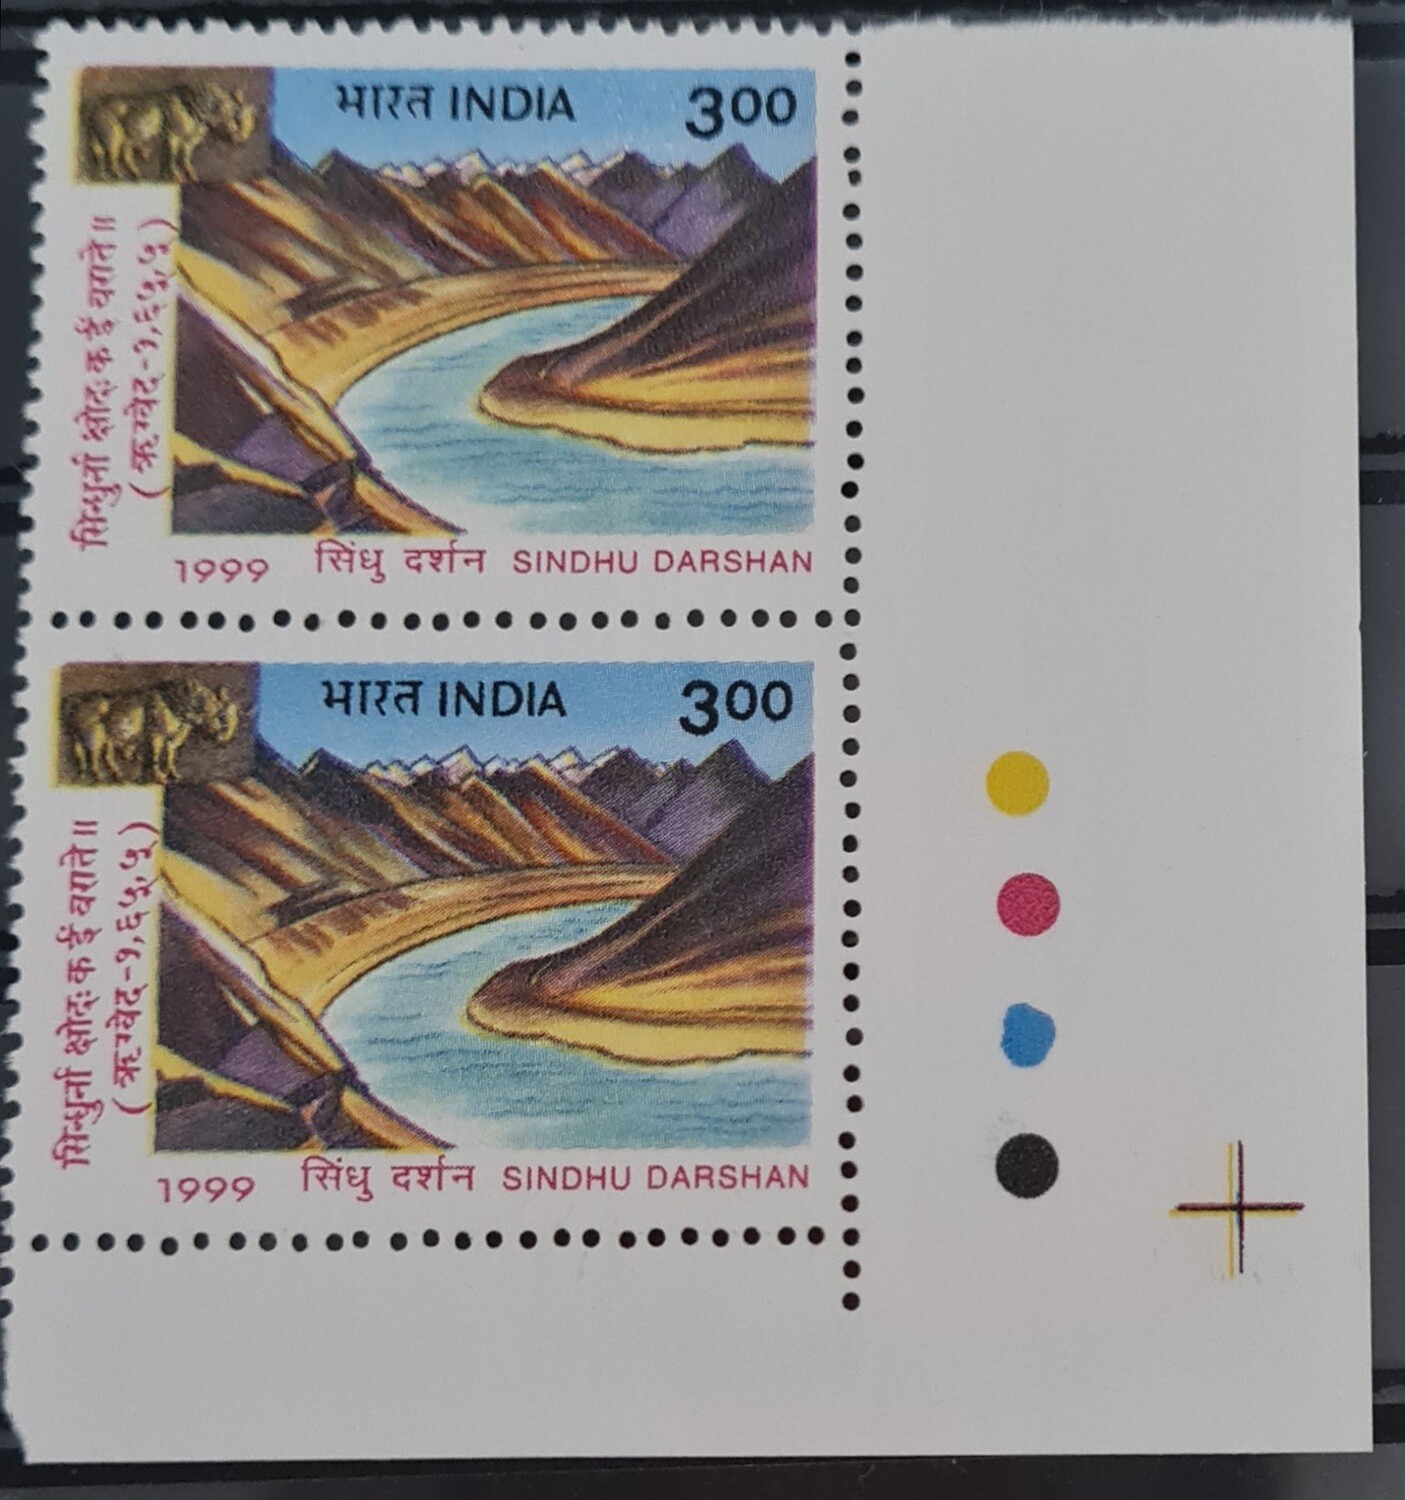 INDIA-SINDHU DARSHAN FESTIVAL 1999 MNH pair of stamps with traffic lights